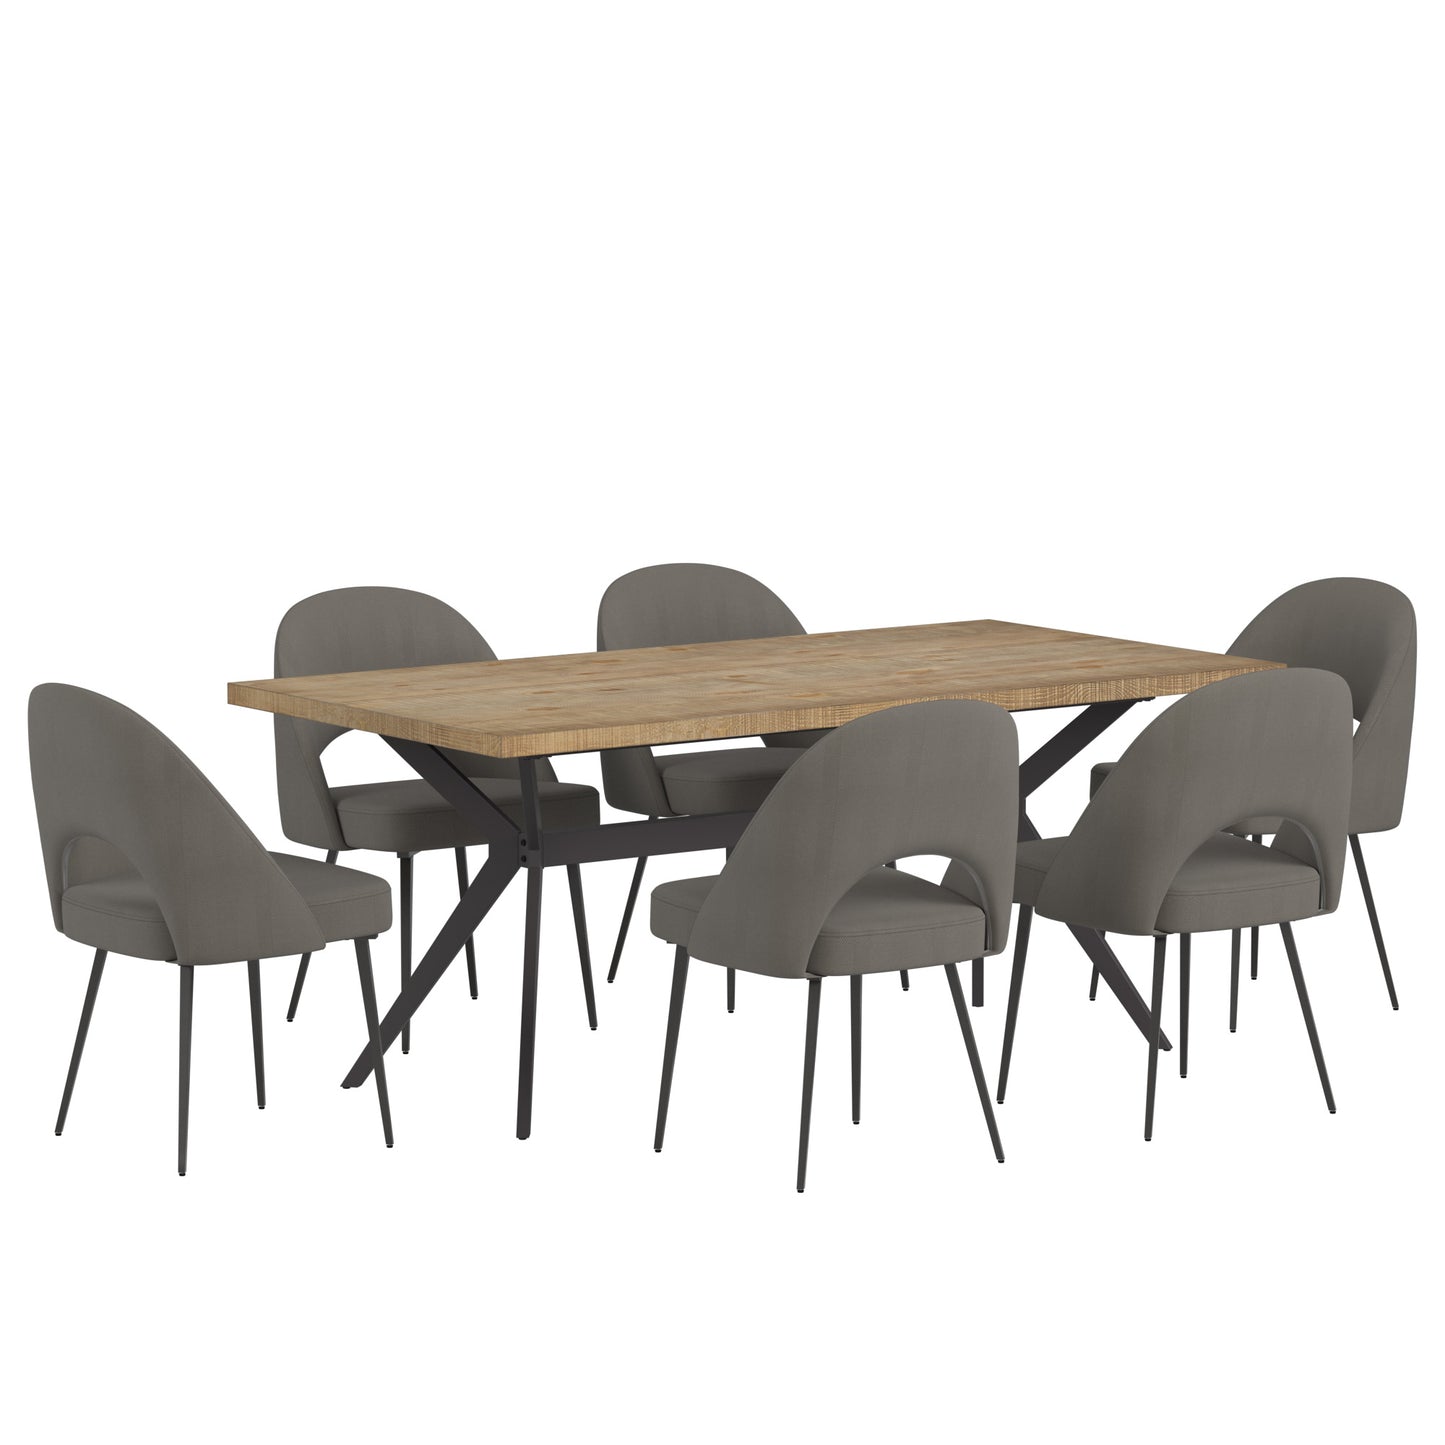 Wood Finish Dining Table with Upholstered Chairs Set - Line Pine Finish Table and Dark Grey Herringbone Fabric Chairs